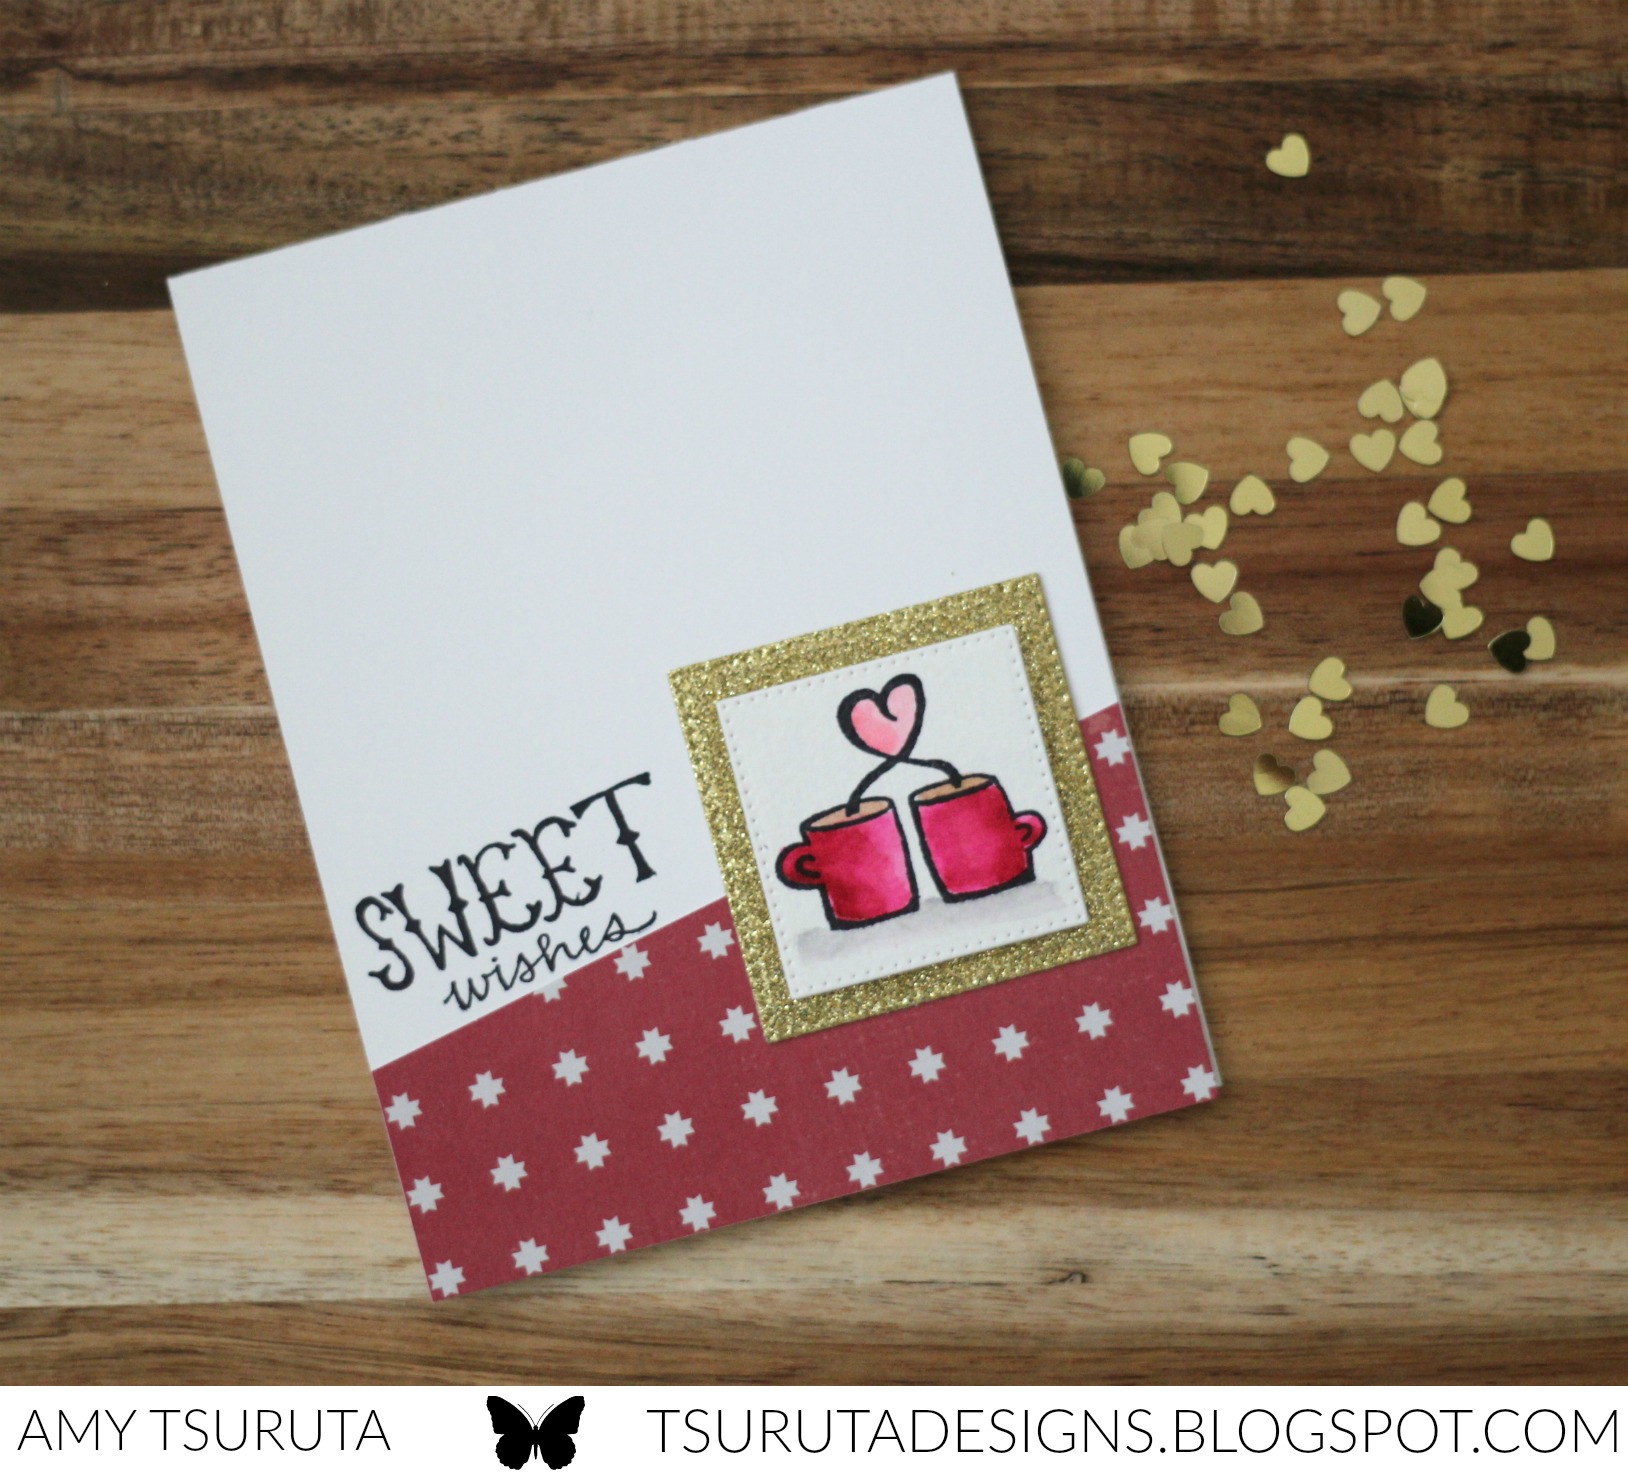 Sweet Wishes by Amy Tsuruta for Savvy stamps